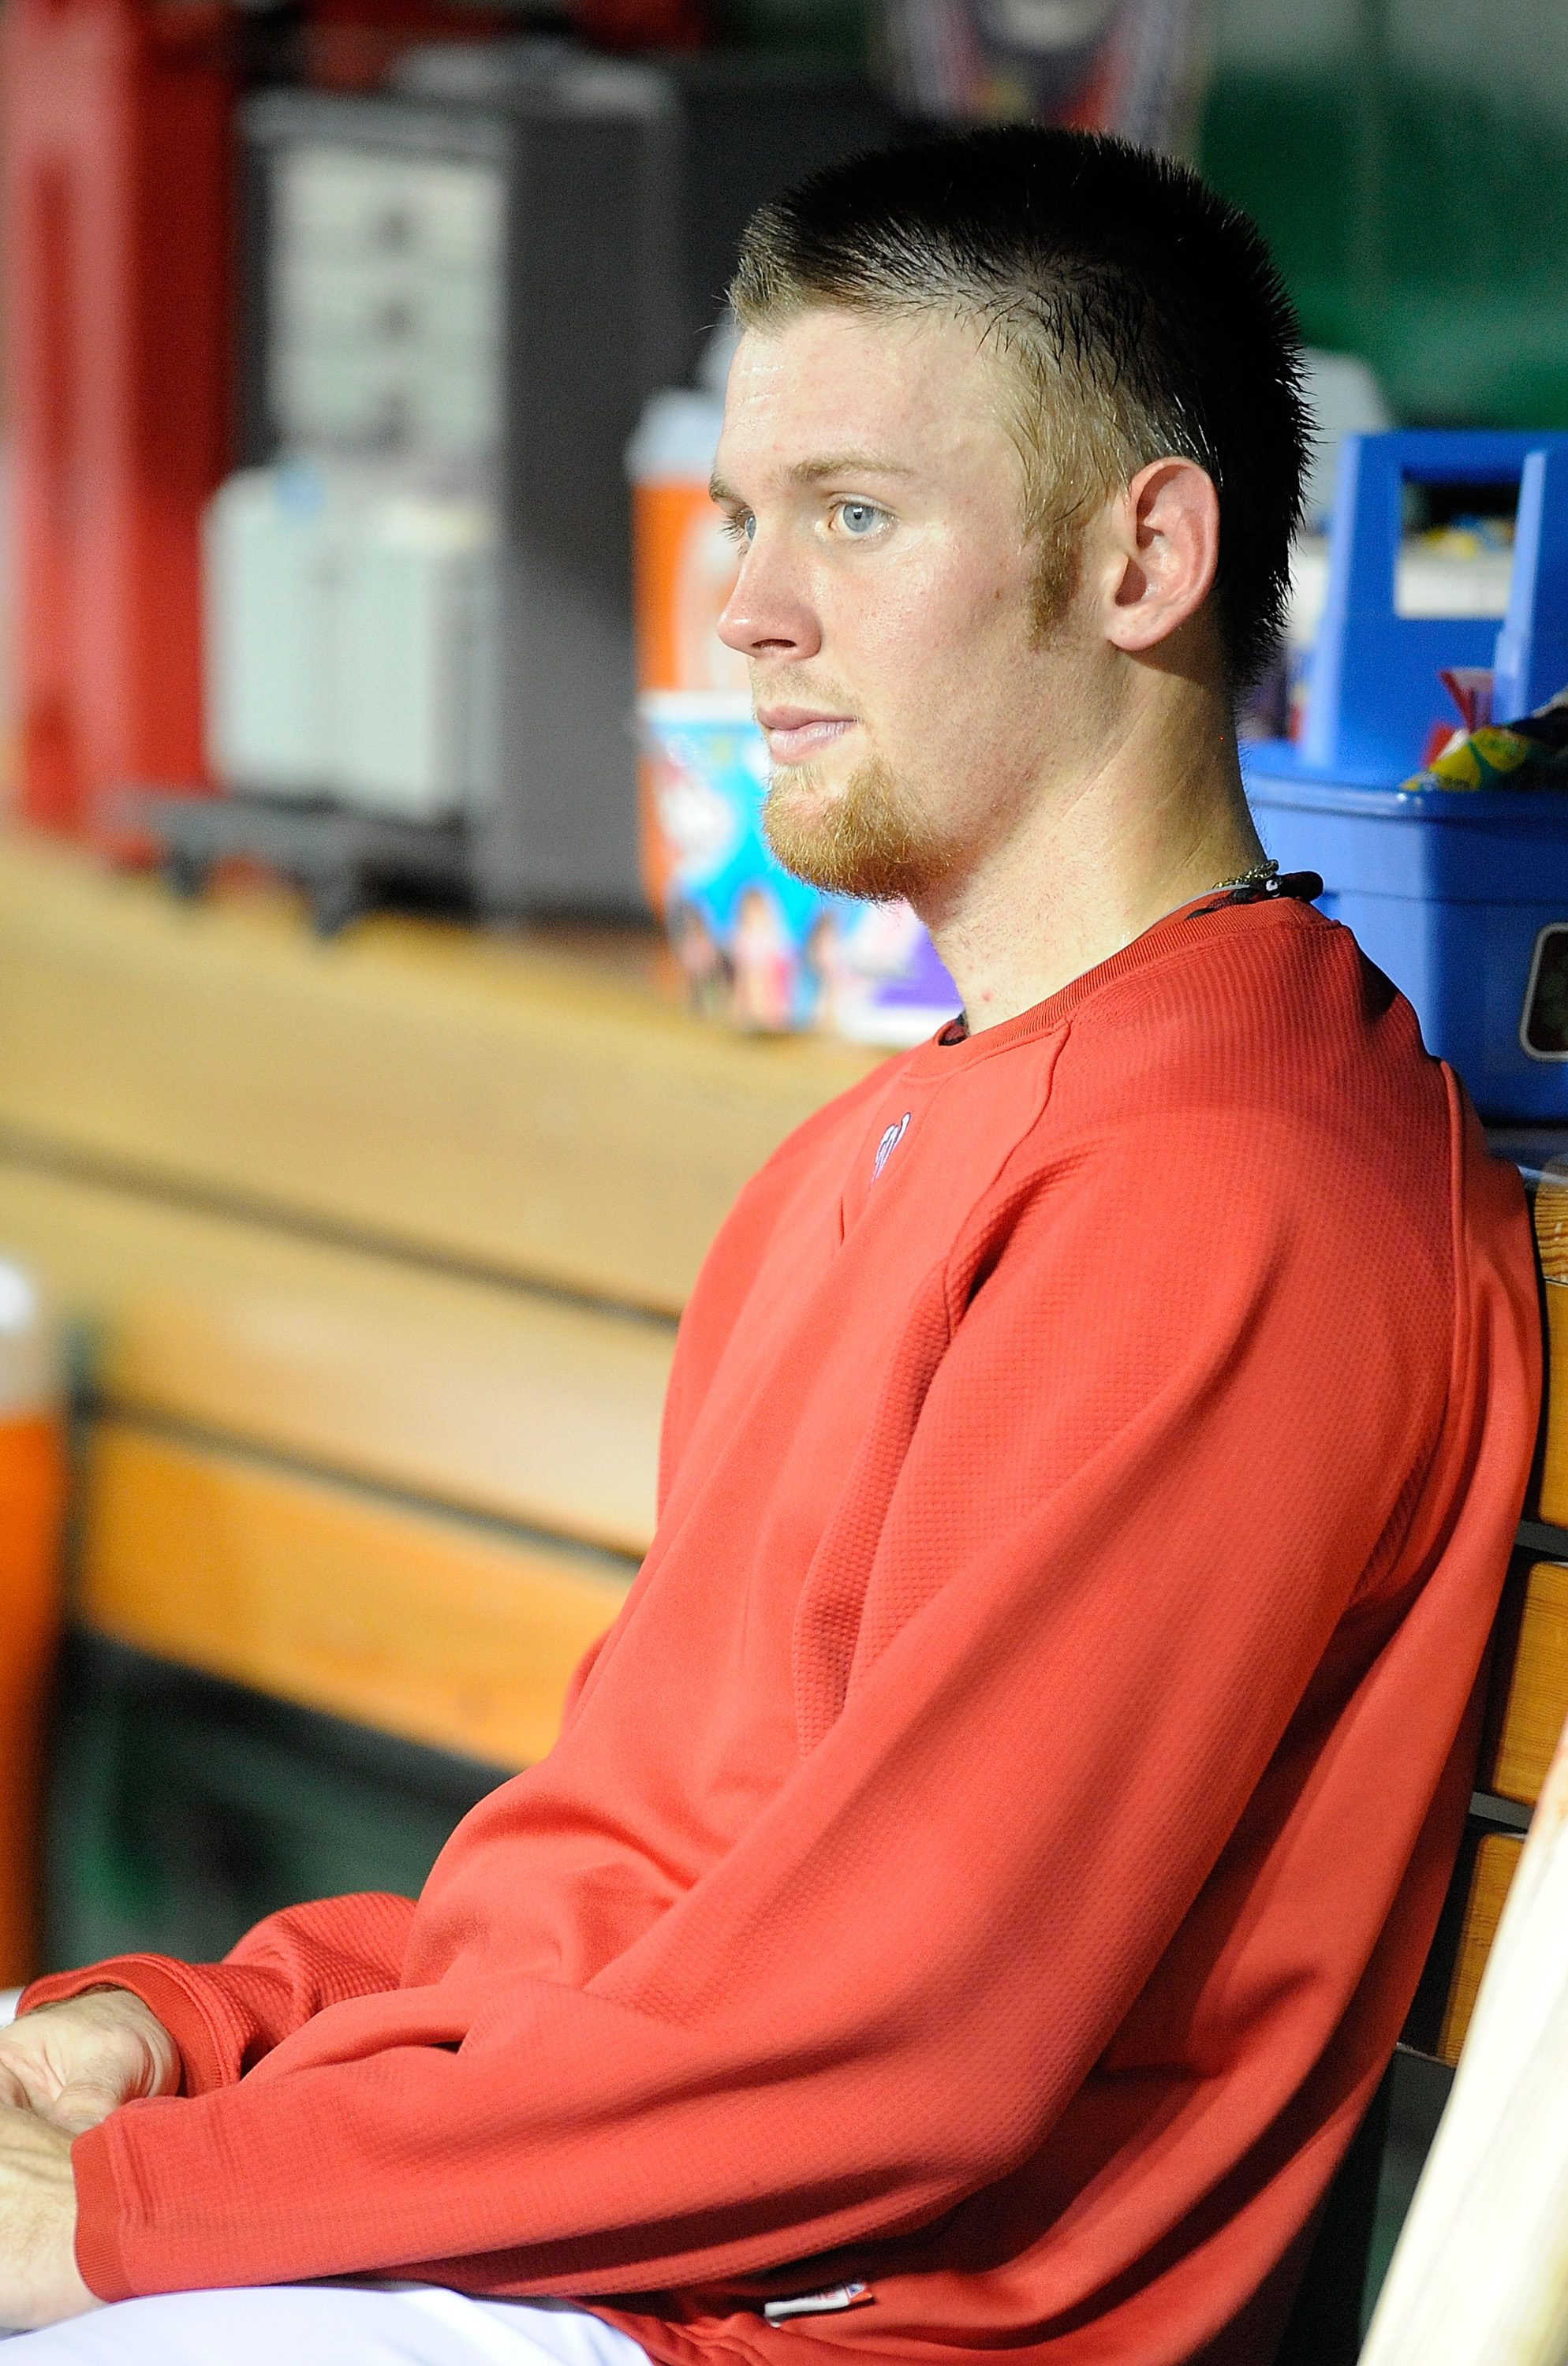 WASHINGTON - AUGUST 10:  Stephen Strasburg #37 of the Washington Nationals sits in the dugout during the sixth inning of the game against the Florida Marlins at Nationals Park on August 10, 2010 in Washington, DC.  (Photo by Greg Fiume/Getty Images)